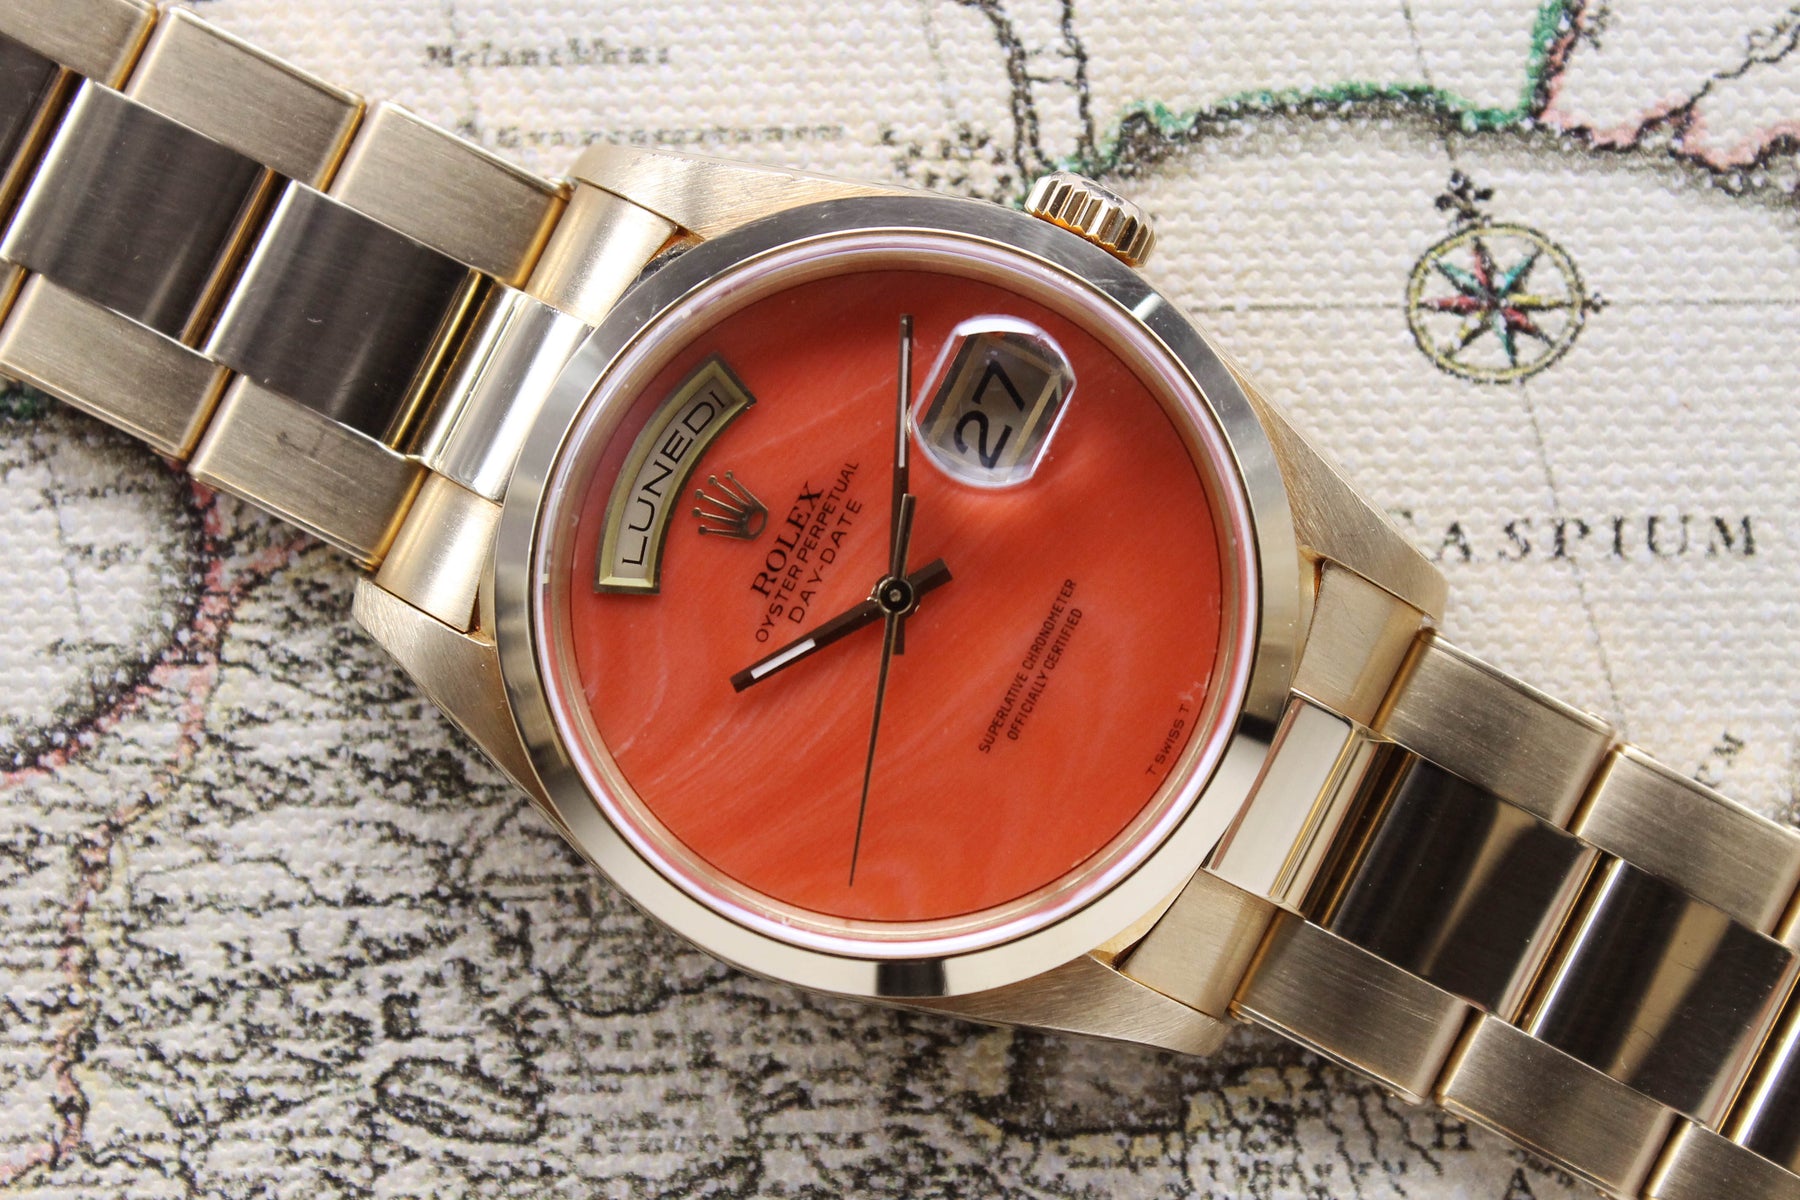 1999 Rolex Day Date Coral Ref. 18208 (with Papers) - Price on Request